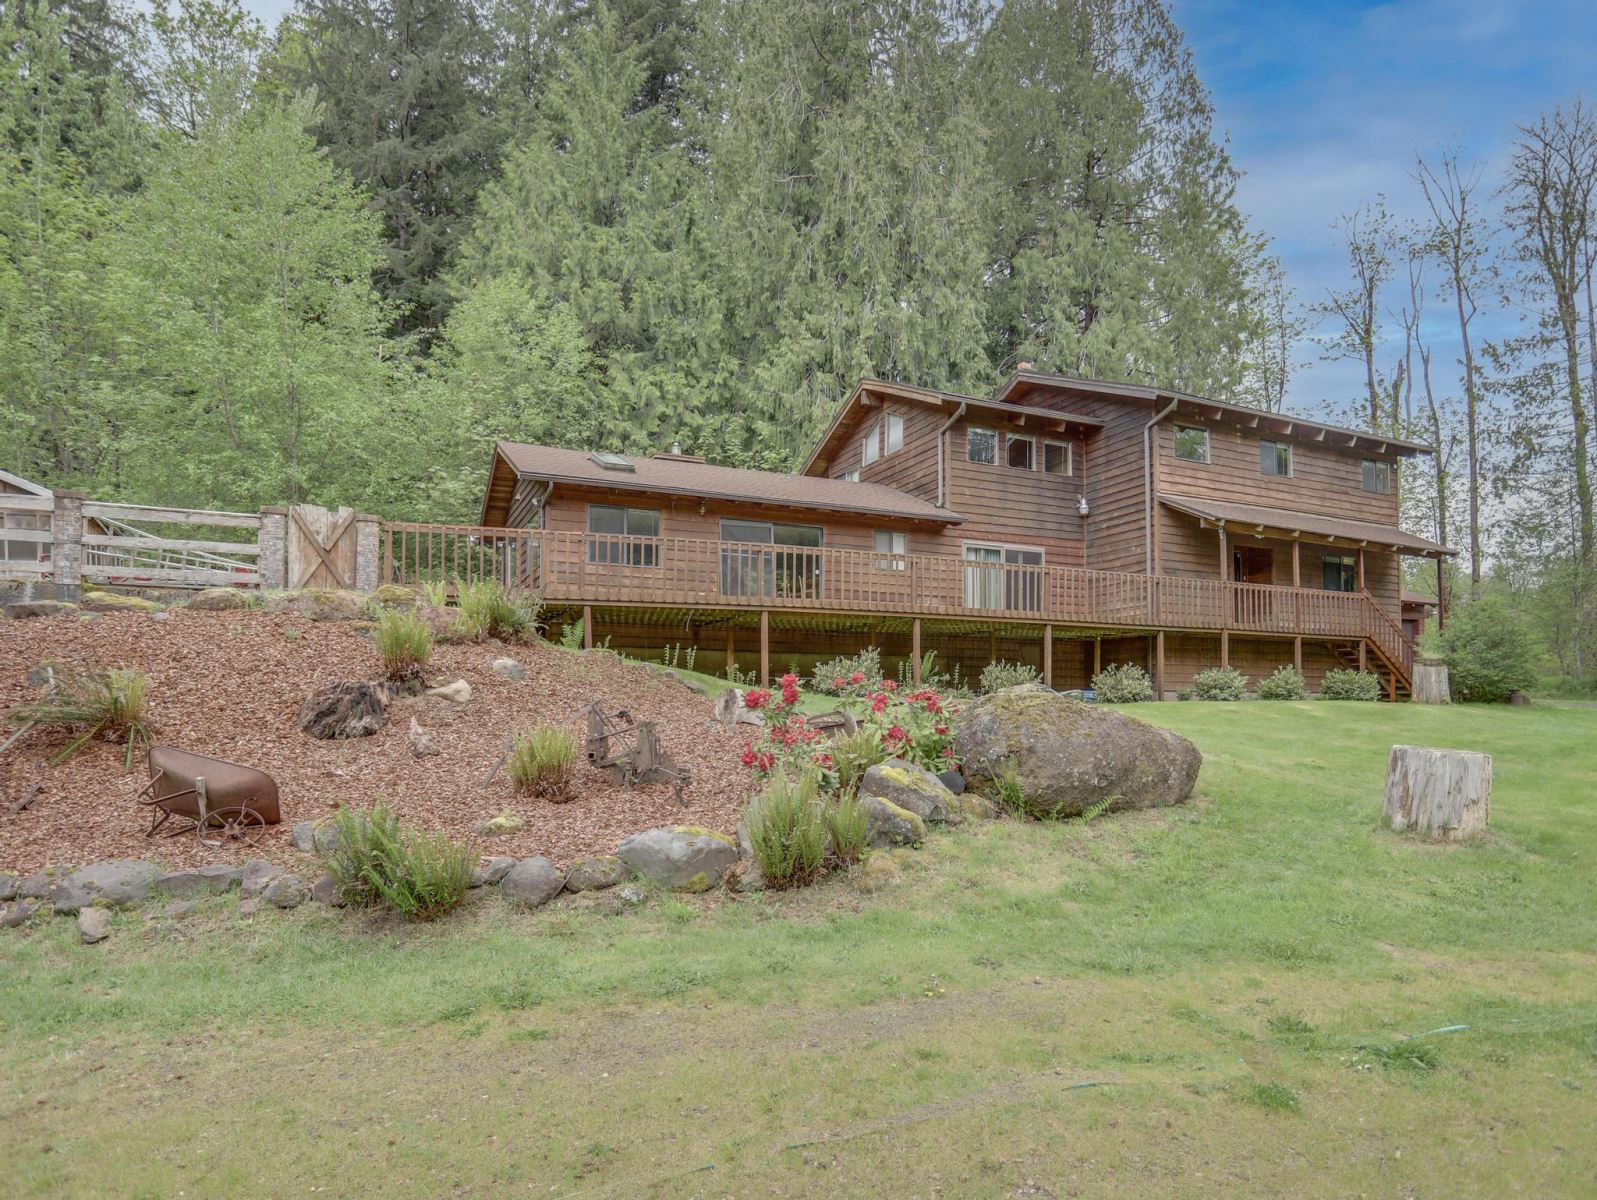 Brightwood Acreage on Mt. Hood with Four Bedroom Home